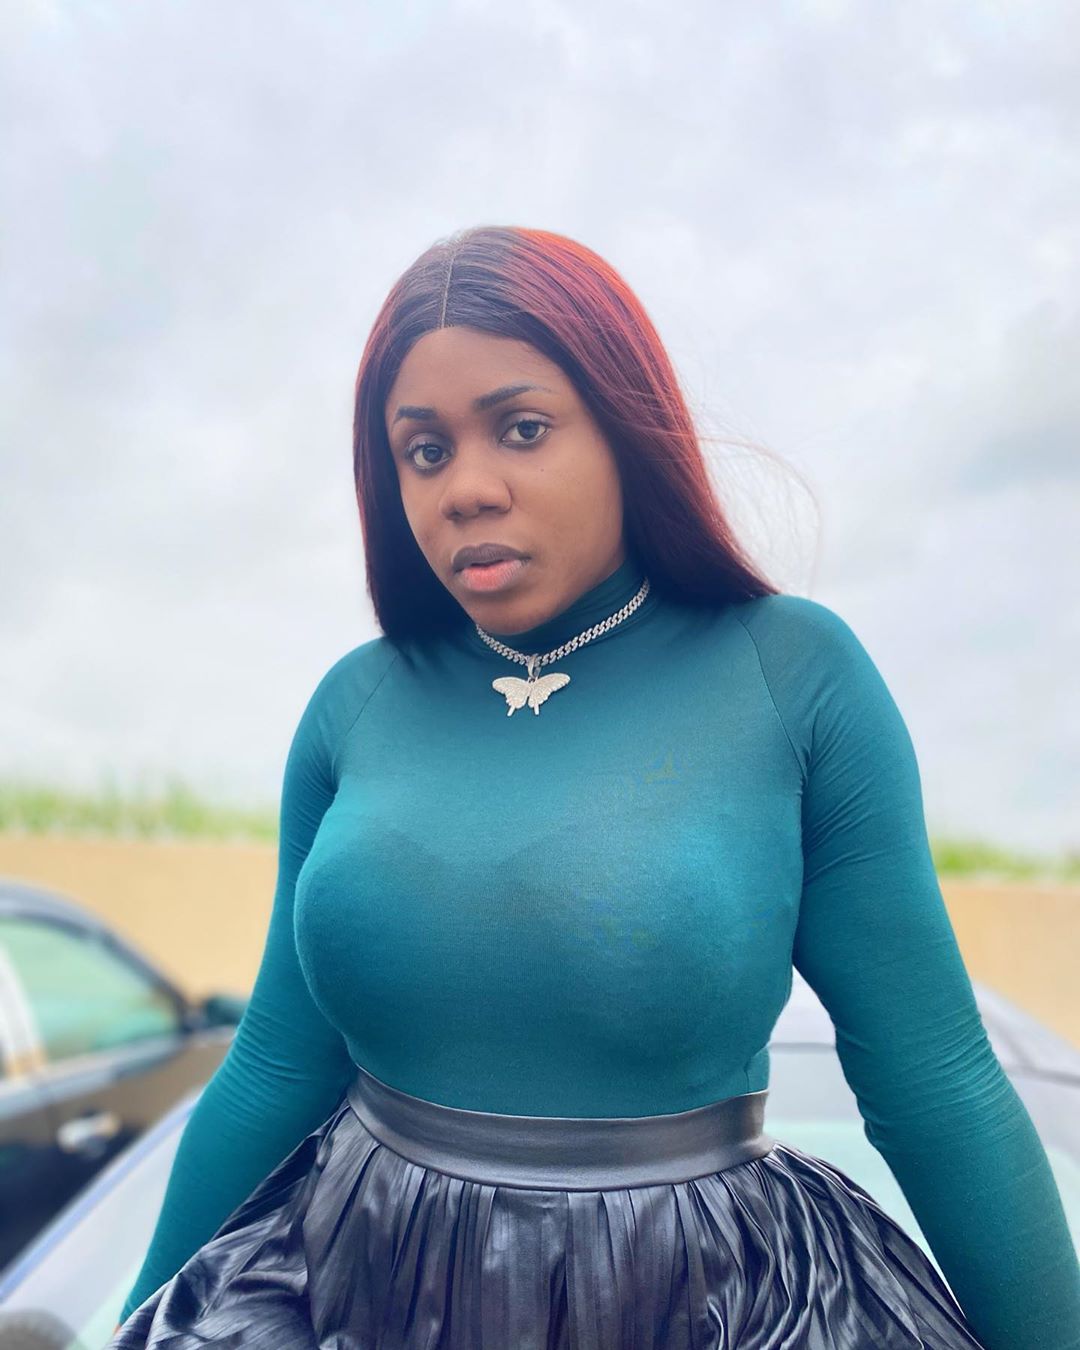 Chat between Instagram comedian, Nons Miraj and OAP Nedu surfaces amid accusations of an affair with Dino Melaye (Screenshots)